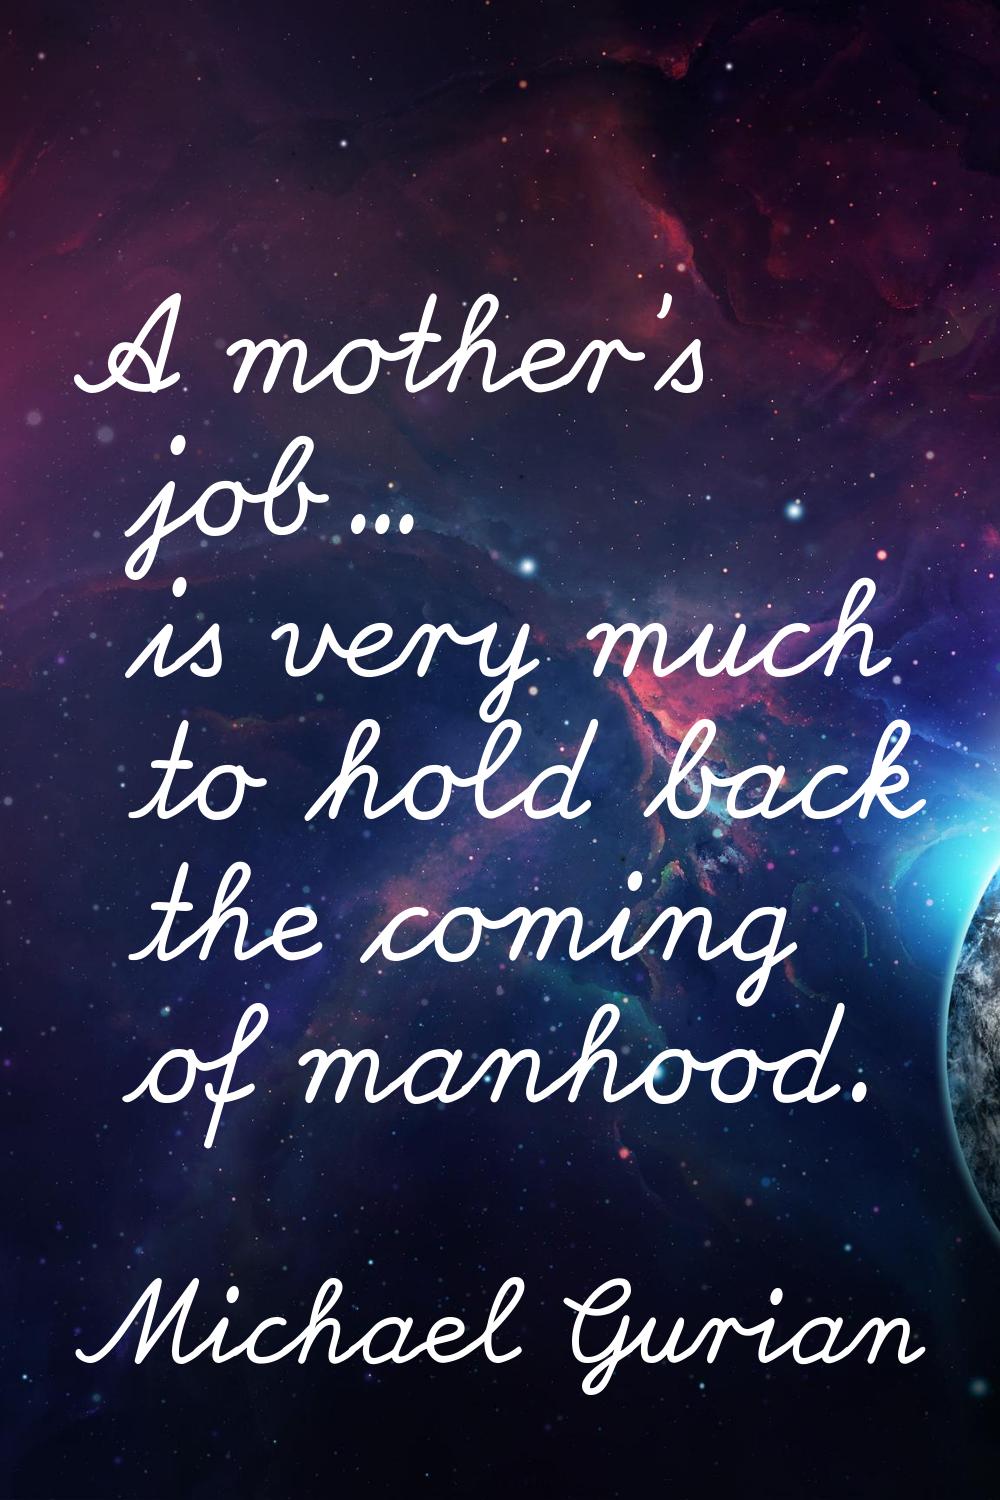 A mother's job... is very much to hold back the coming of manhood.